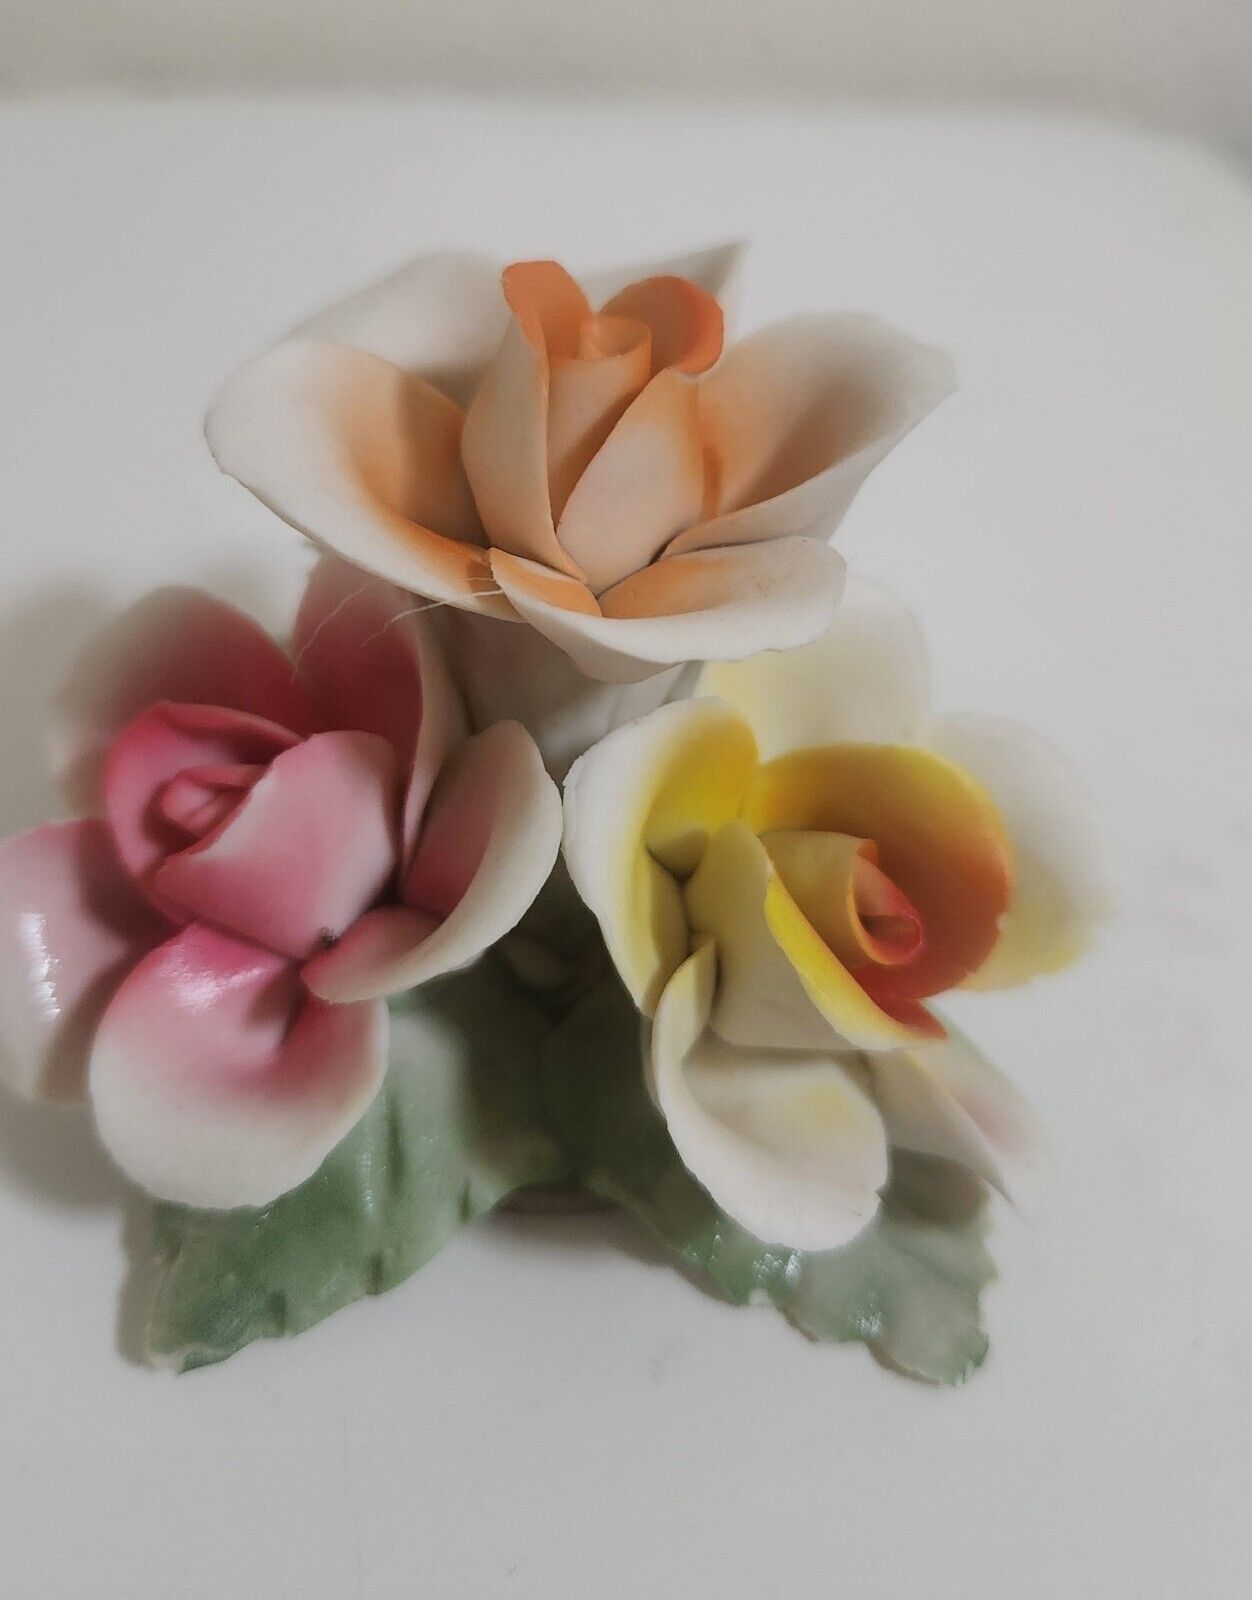 Beautiful Vintage Porcelain Figure of Pink, Red, Orange, and Yellow Flowers....